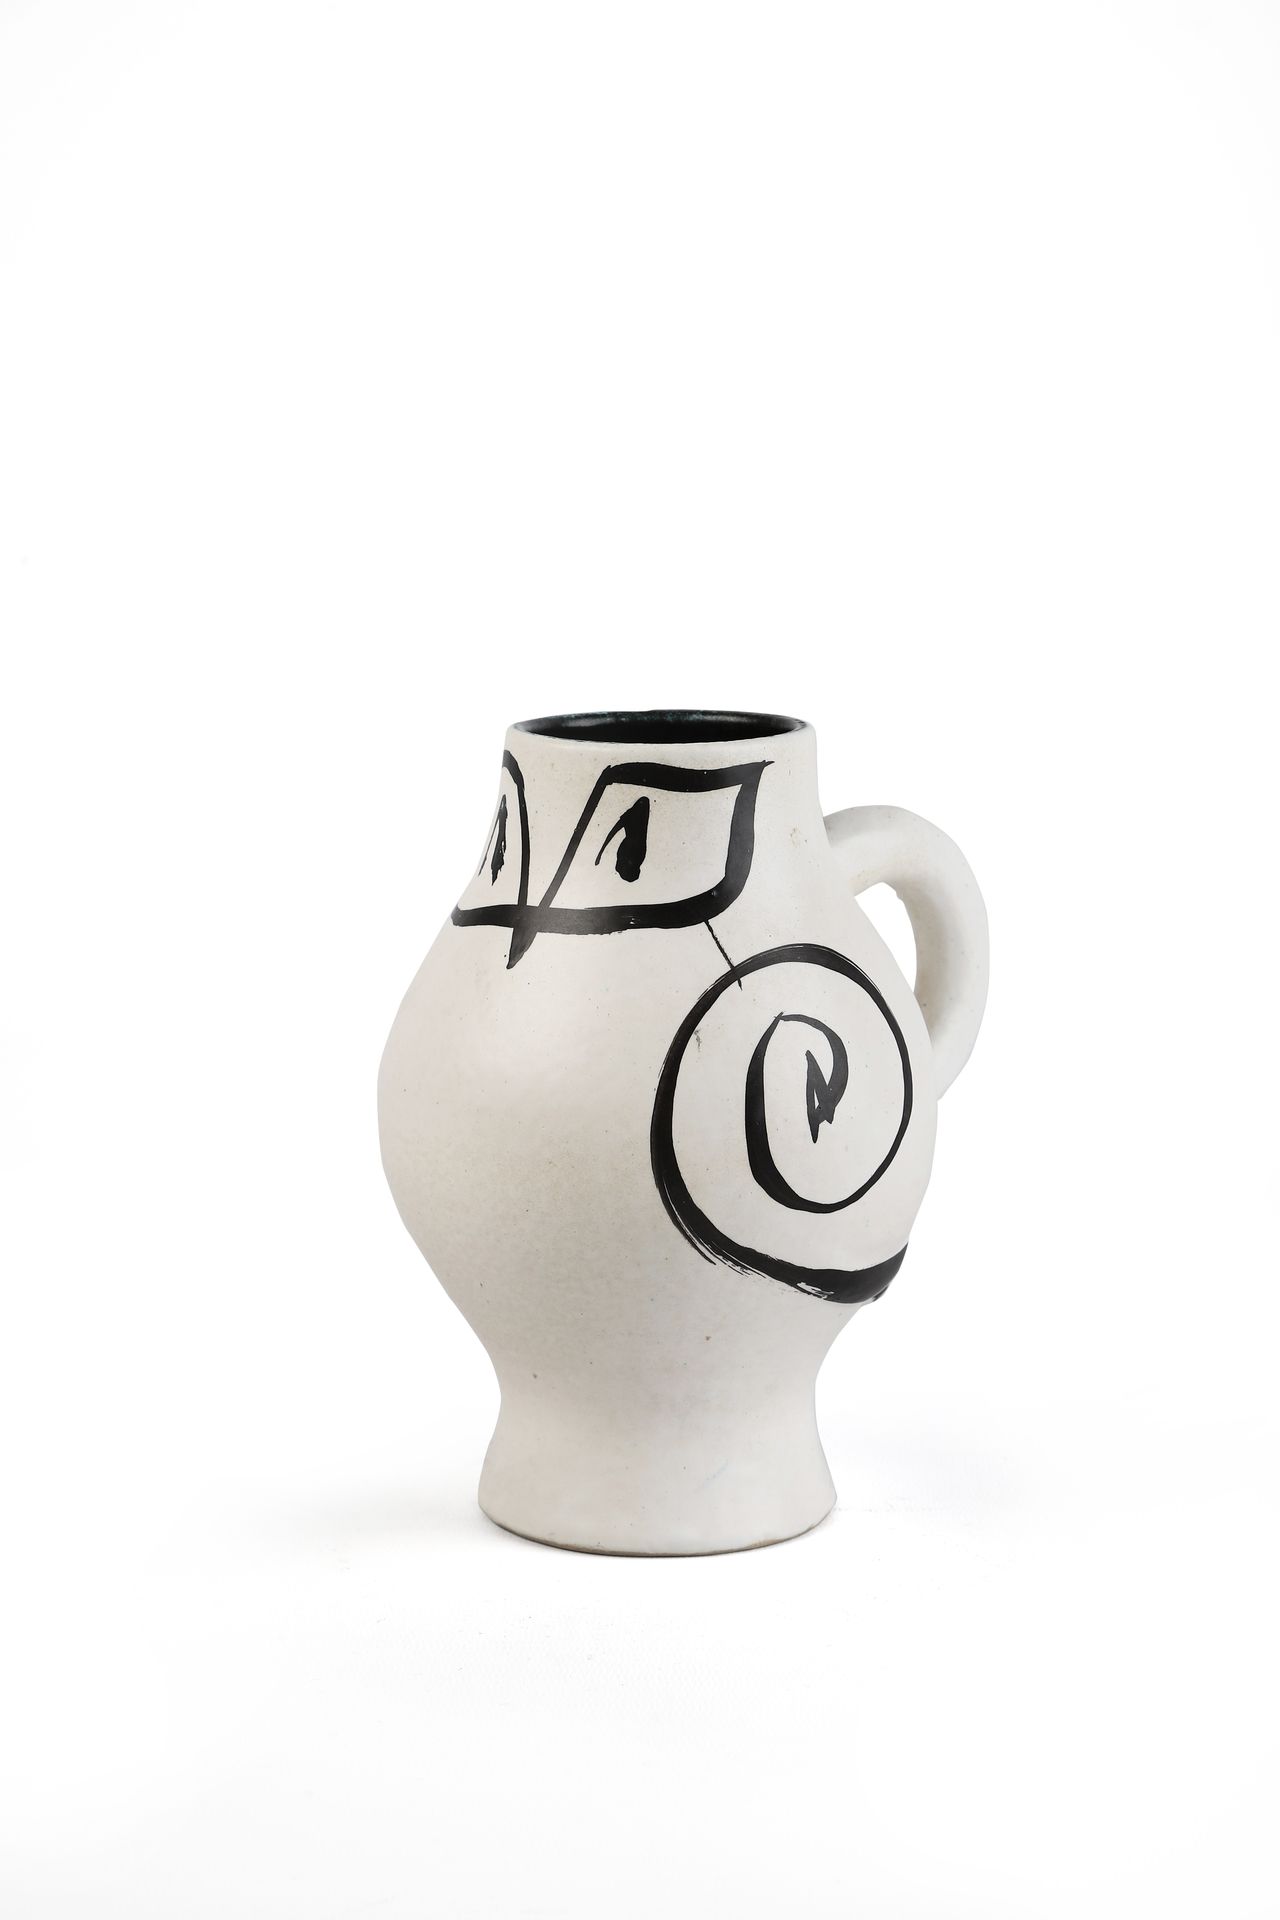 Null Georges JOUVE (1910-1964)
Chouette pitcher, circa 1952, in white glazed cer&hellip;